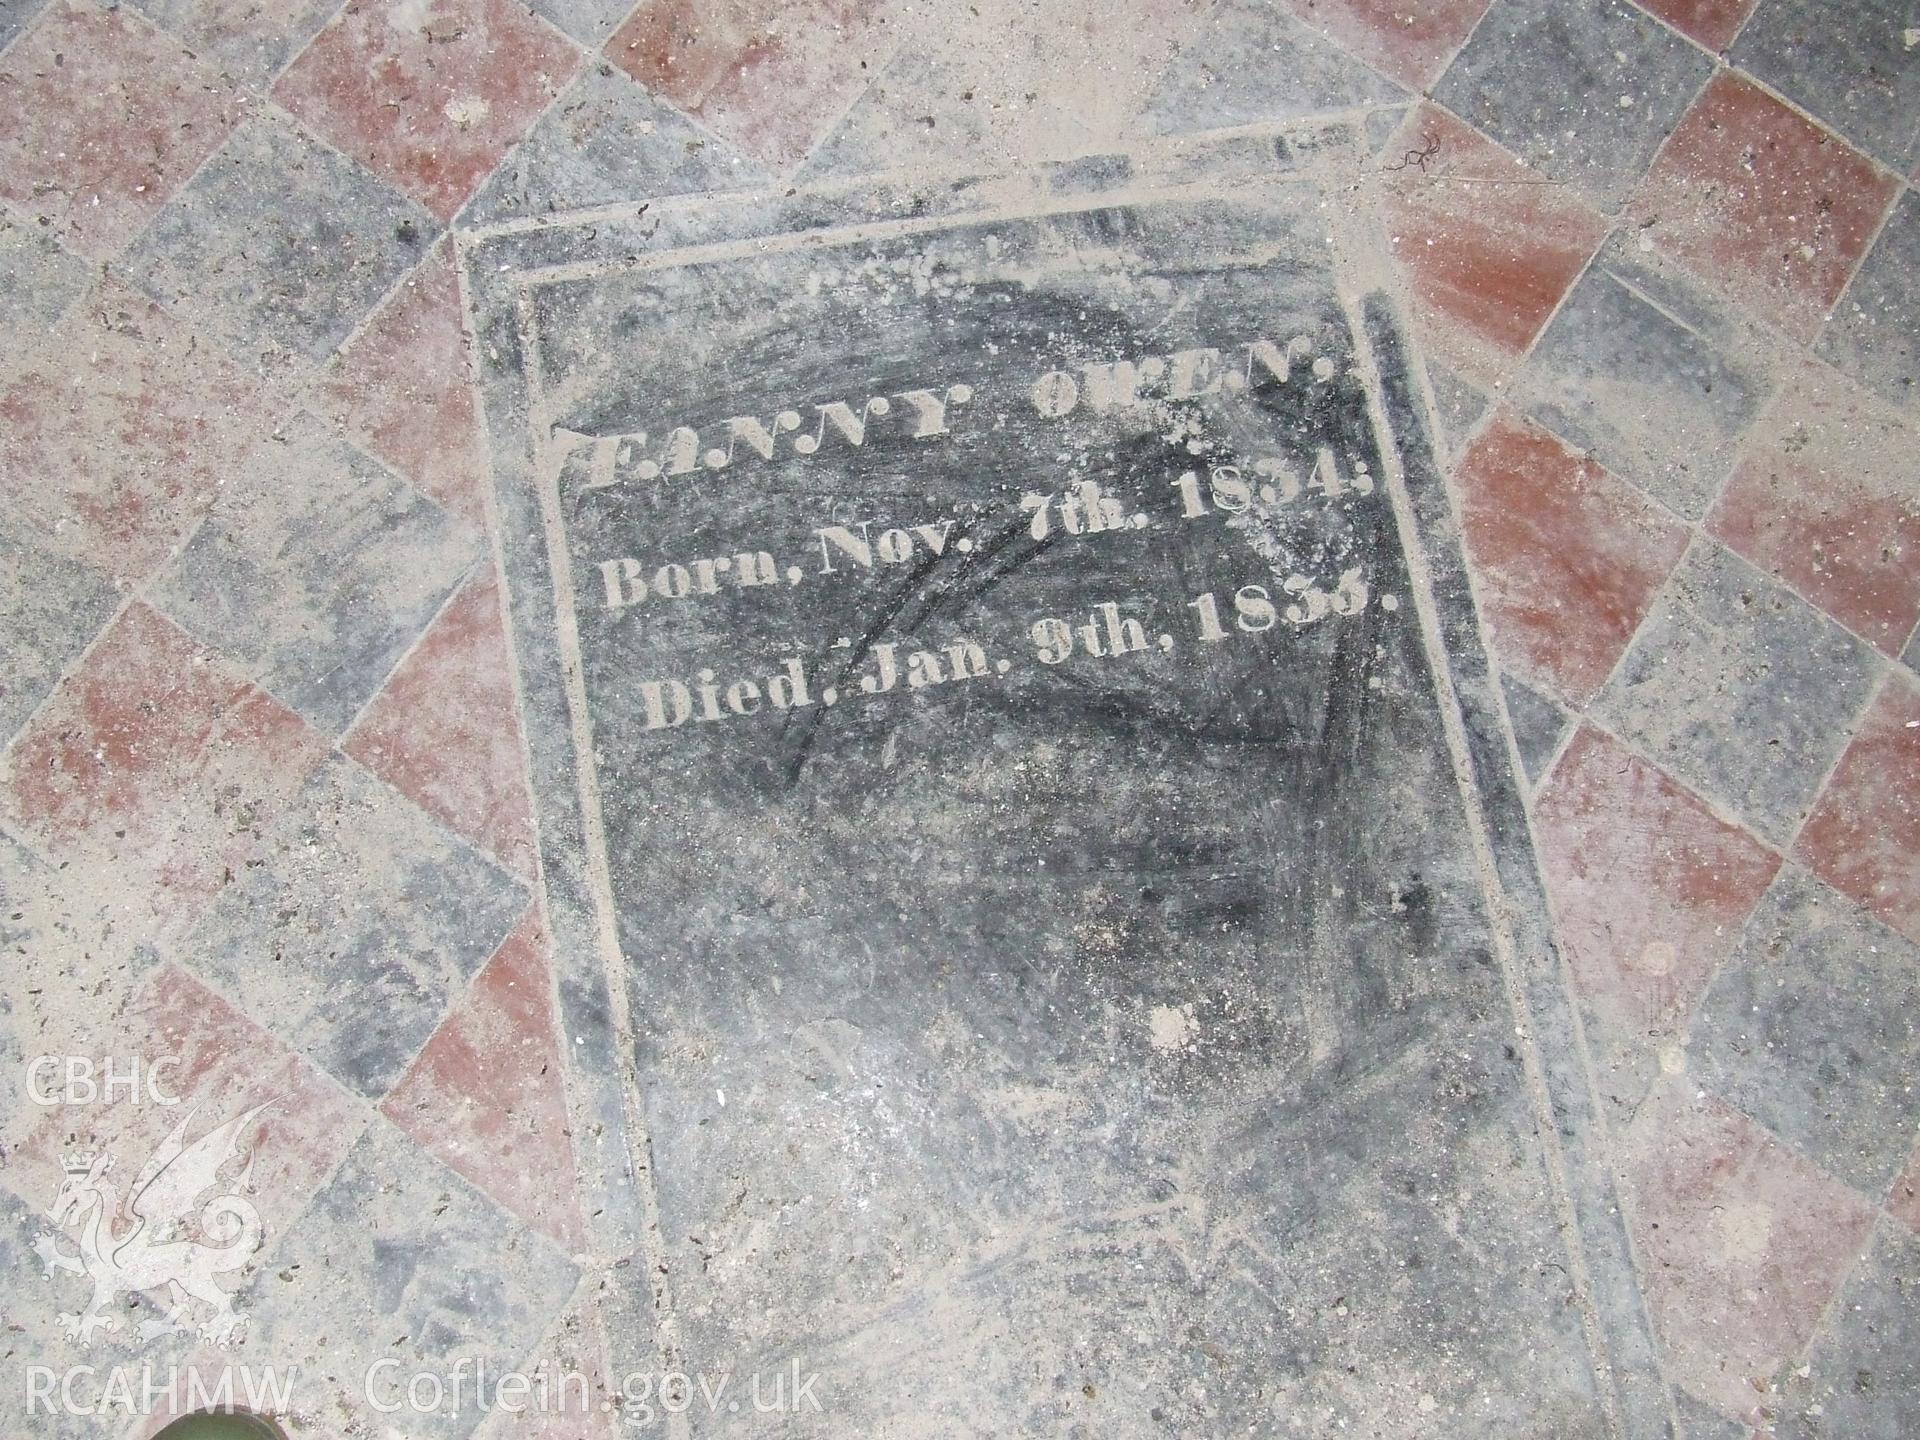 Digital colour photograph showing infant memorial to 'Jenny Owen' dated 1835, in the altar floor at St Justinian's Church, Llanstinian. Produced by Martin Davies in 2022.